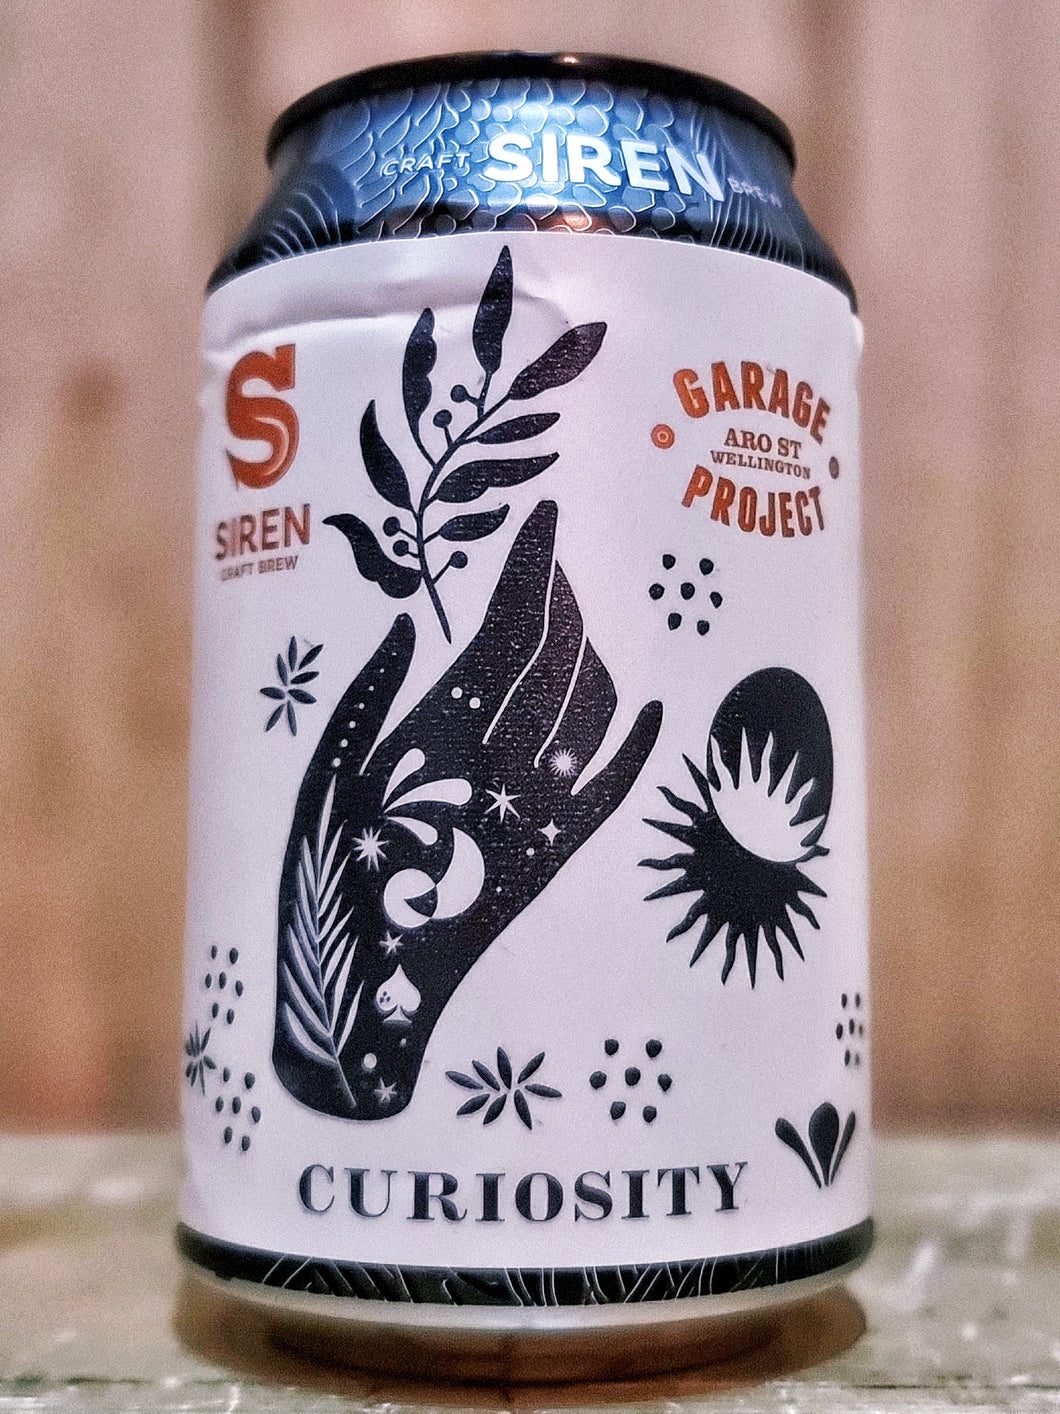 Siren v Garage Project - Curiousity